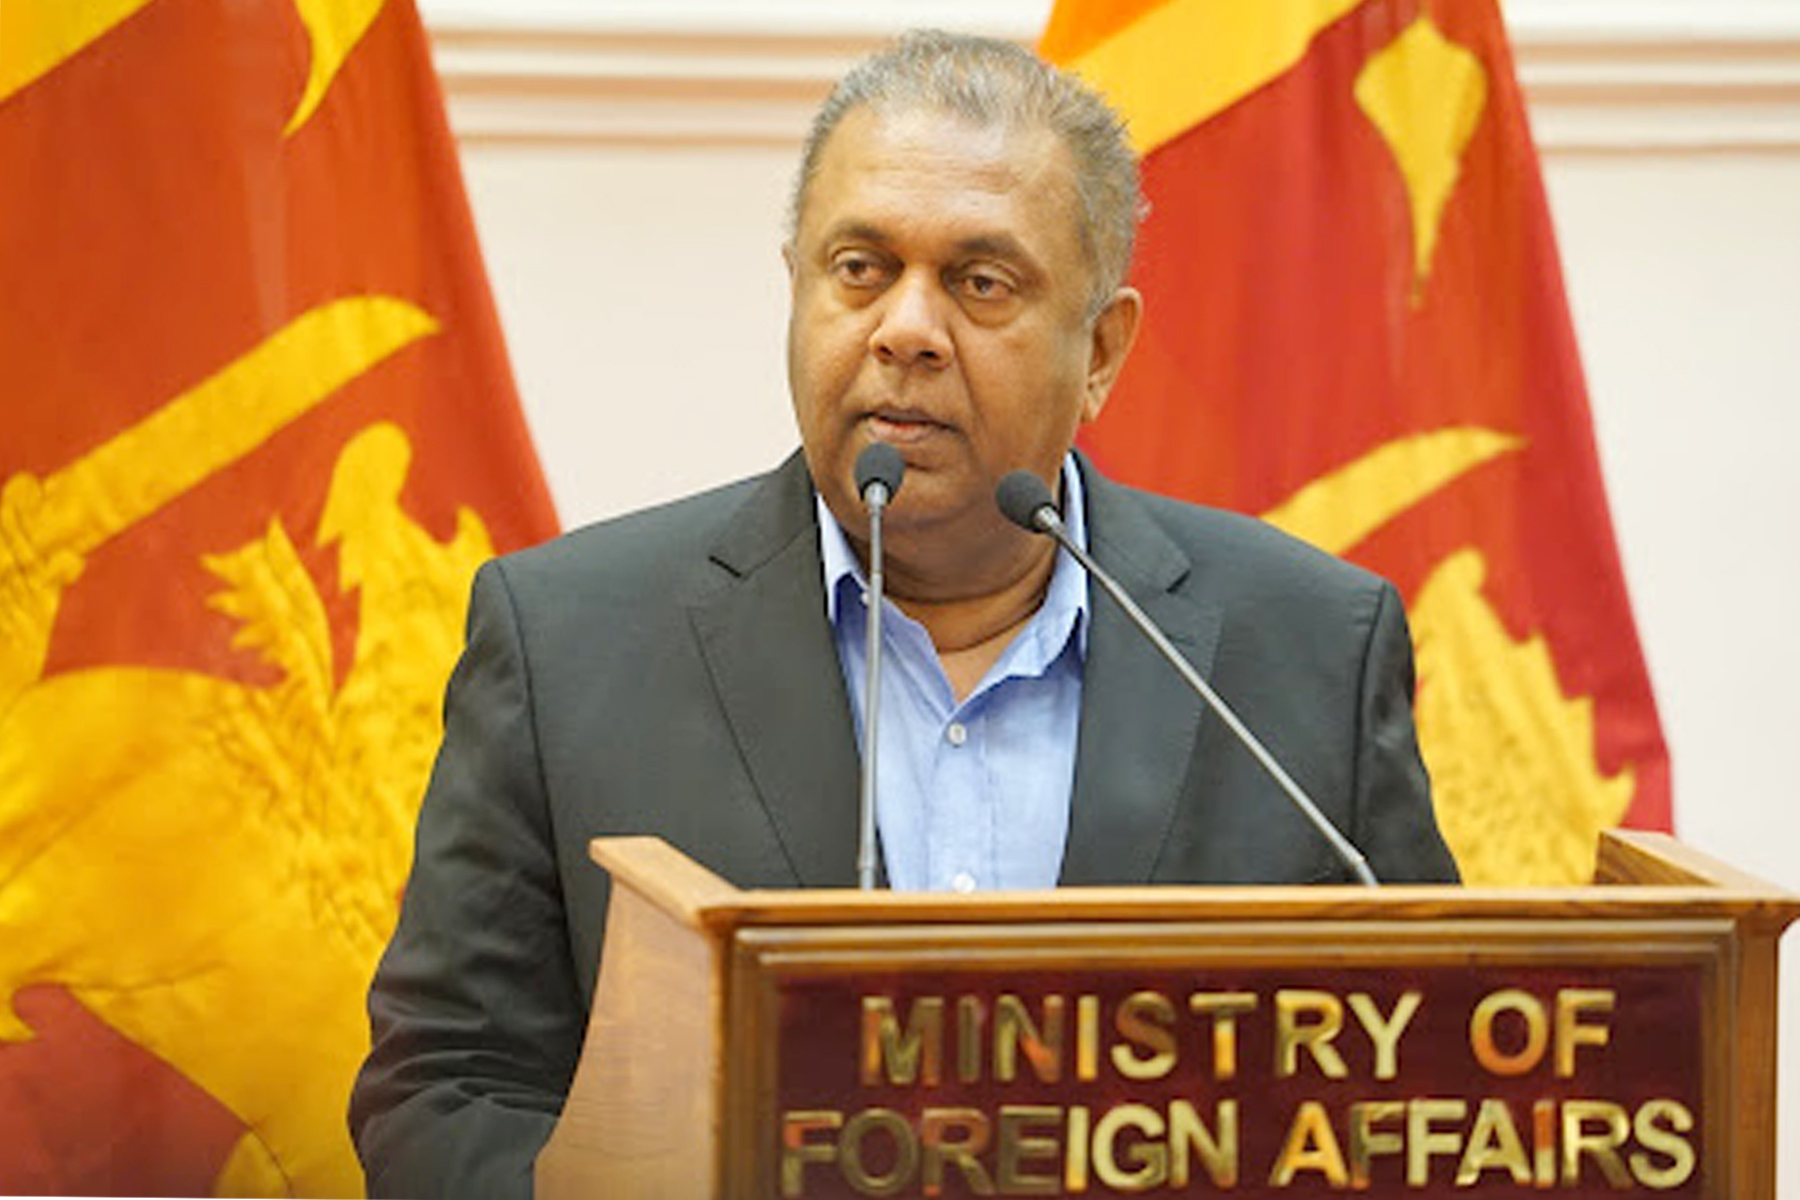 Foreign Ministry expresses condolences on the demise of former Foreign Minister Mangala Samaraweera